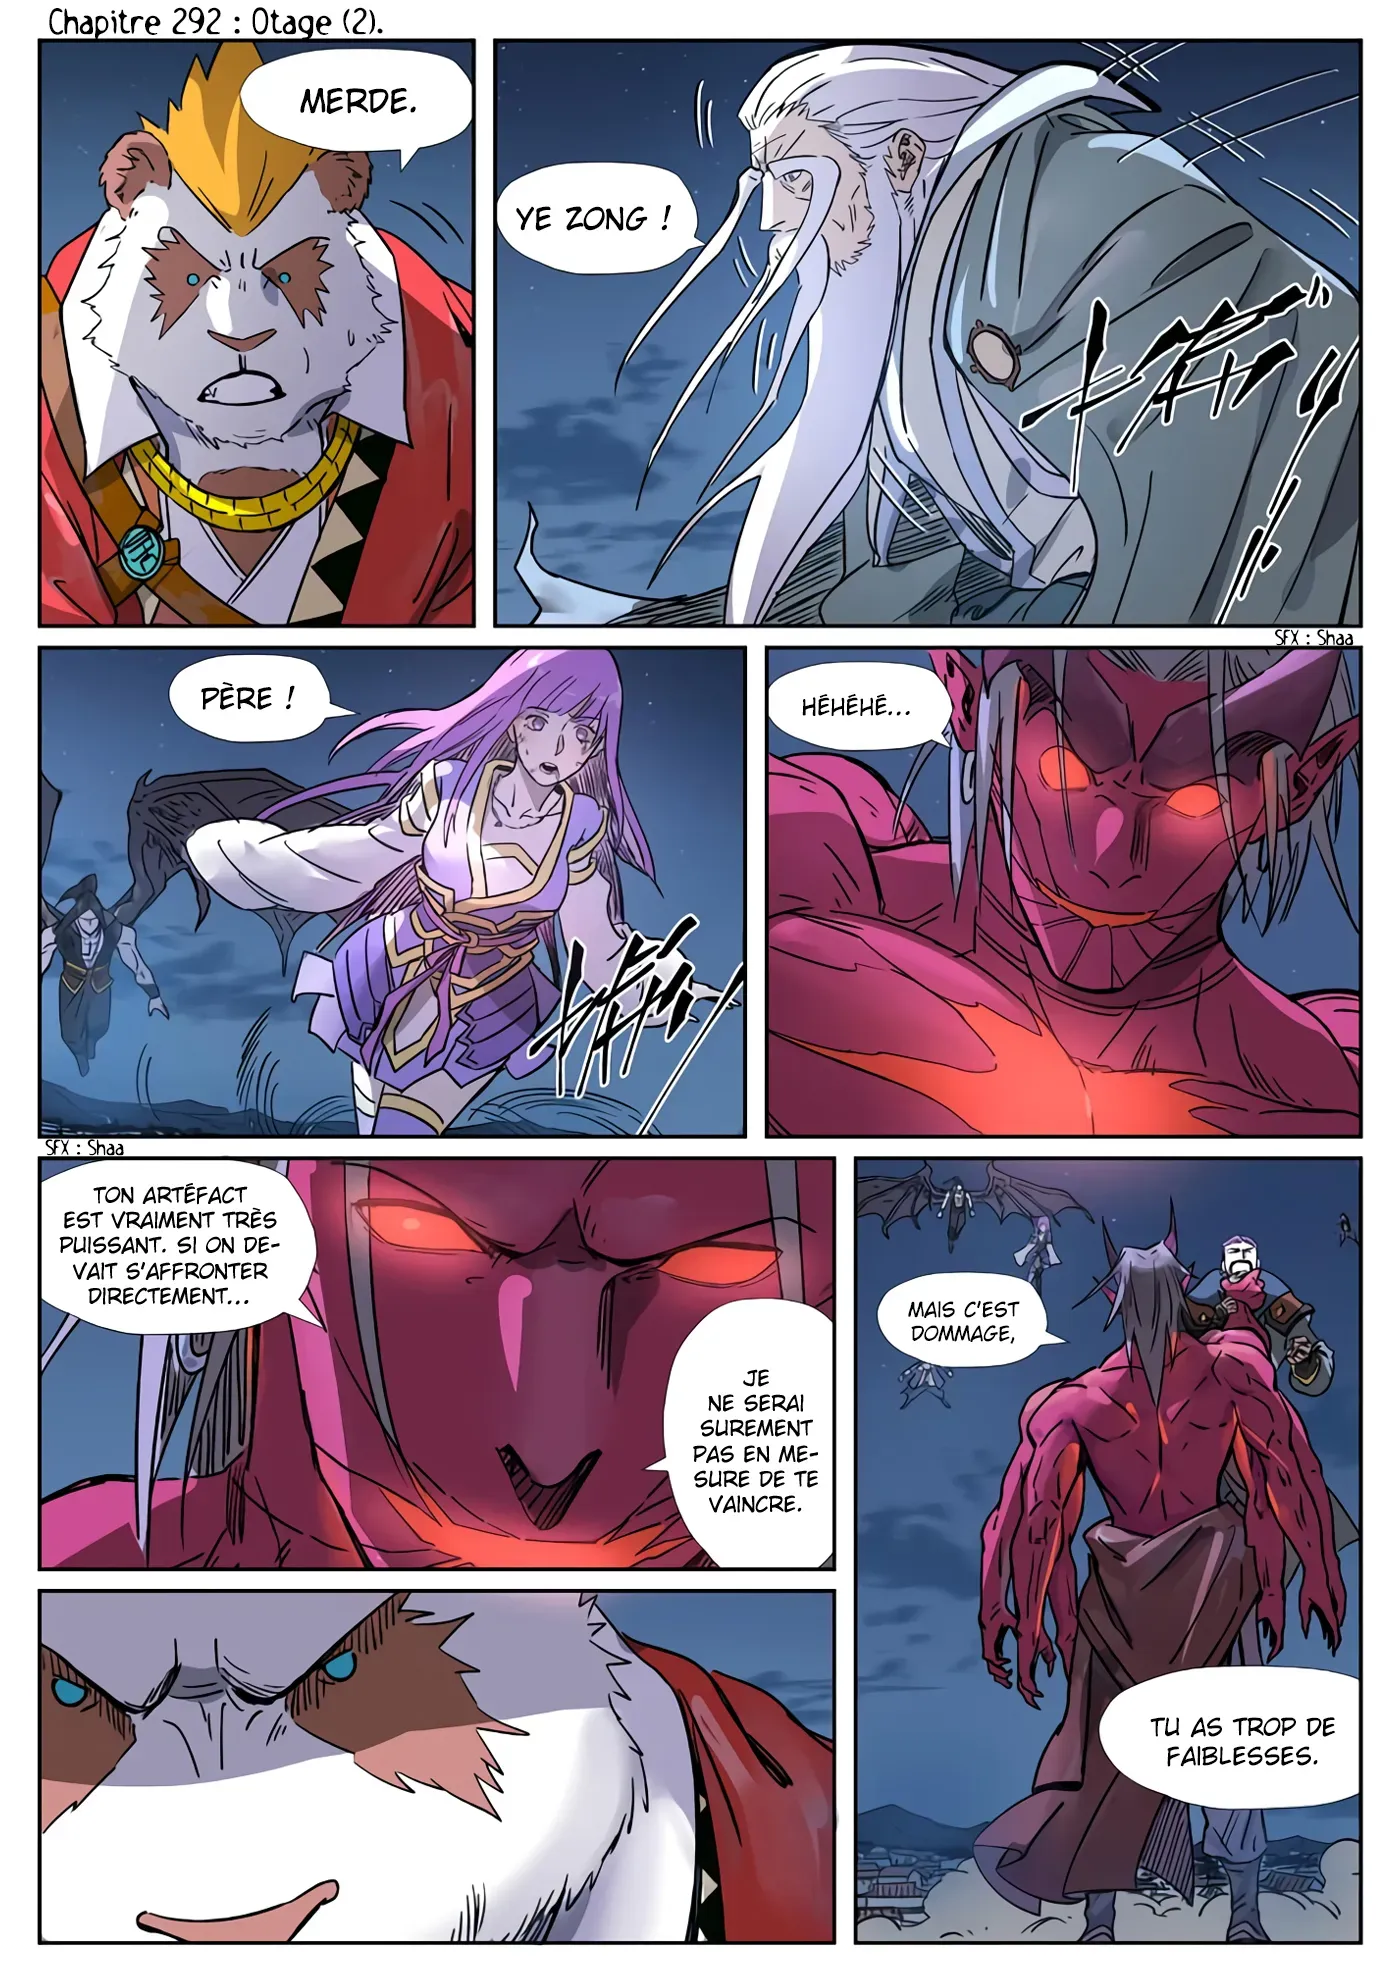 Tales Of Demons And Gods: Chapter chapitre-292.5 - Page 2